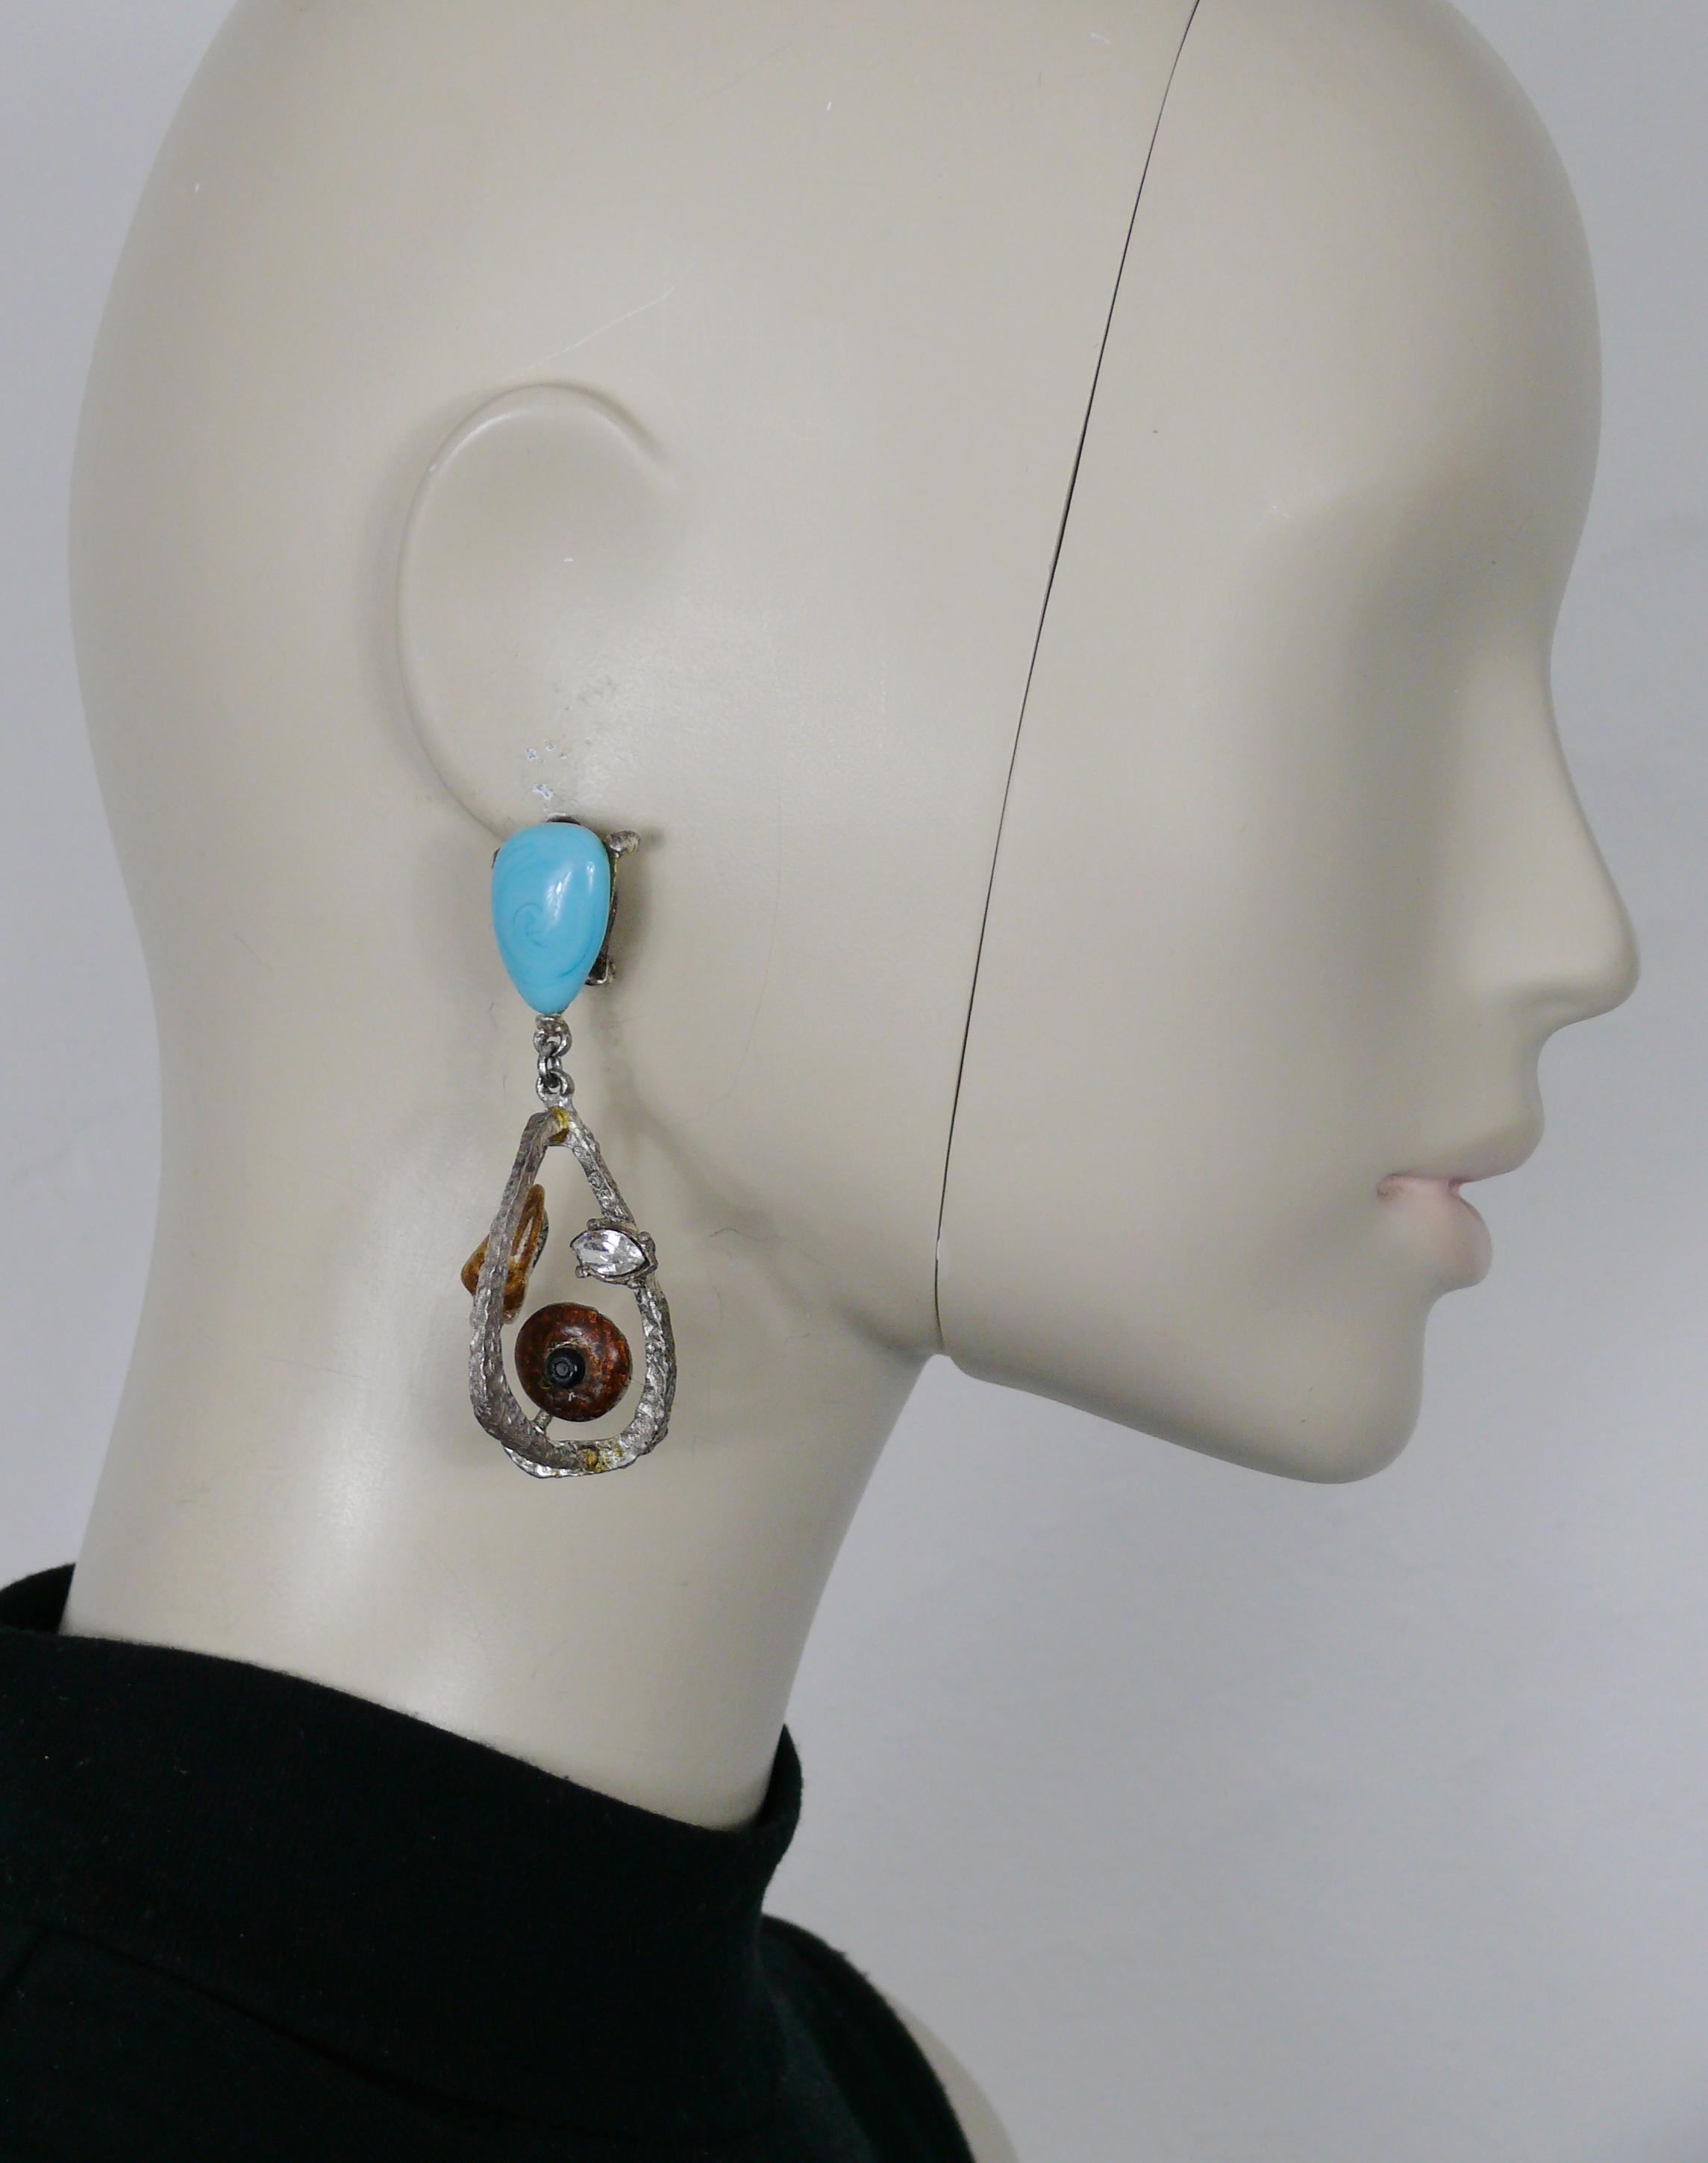 CHRISTIAN LACROIX vintage 3-dimensional silver tone abstract design dangling earrings (clip-on) embellished with blue glass cabochon, clear crystal and enamel.

Marked CHRISTIAN LACROIX CL Made in France.

Indicative measurements : height approx.